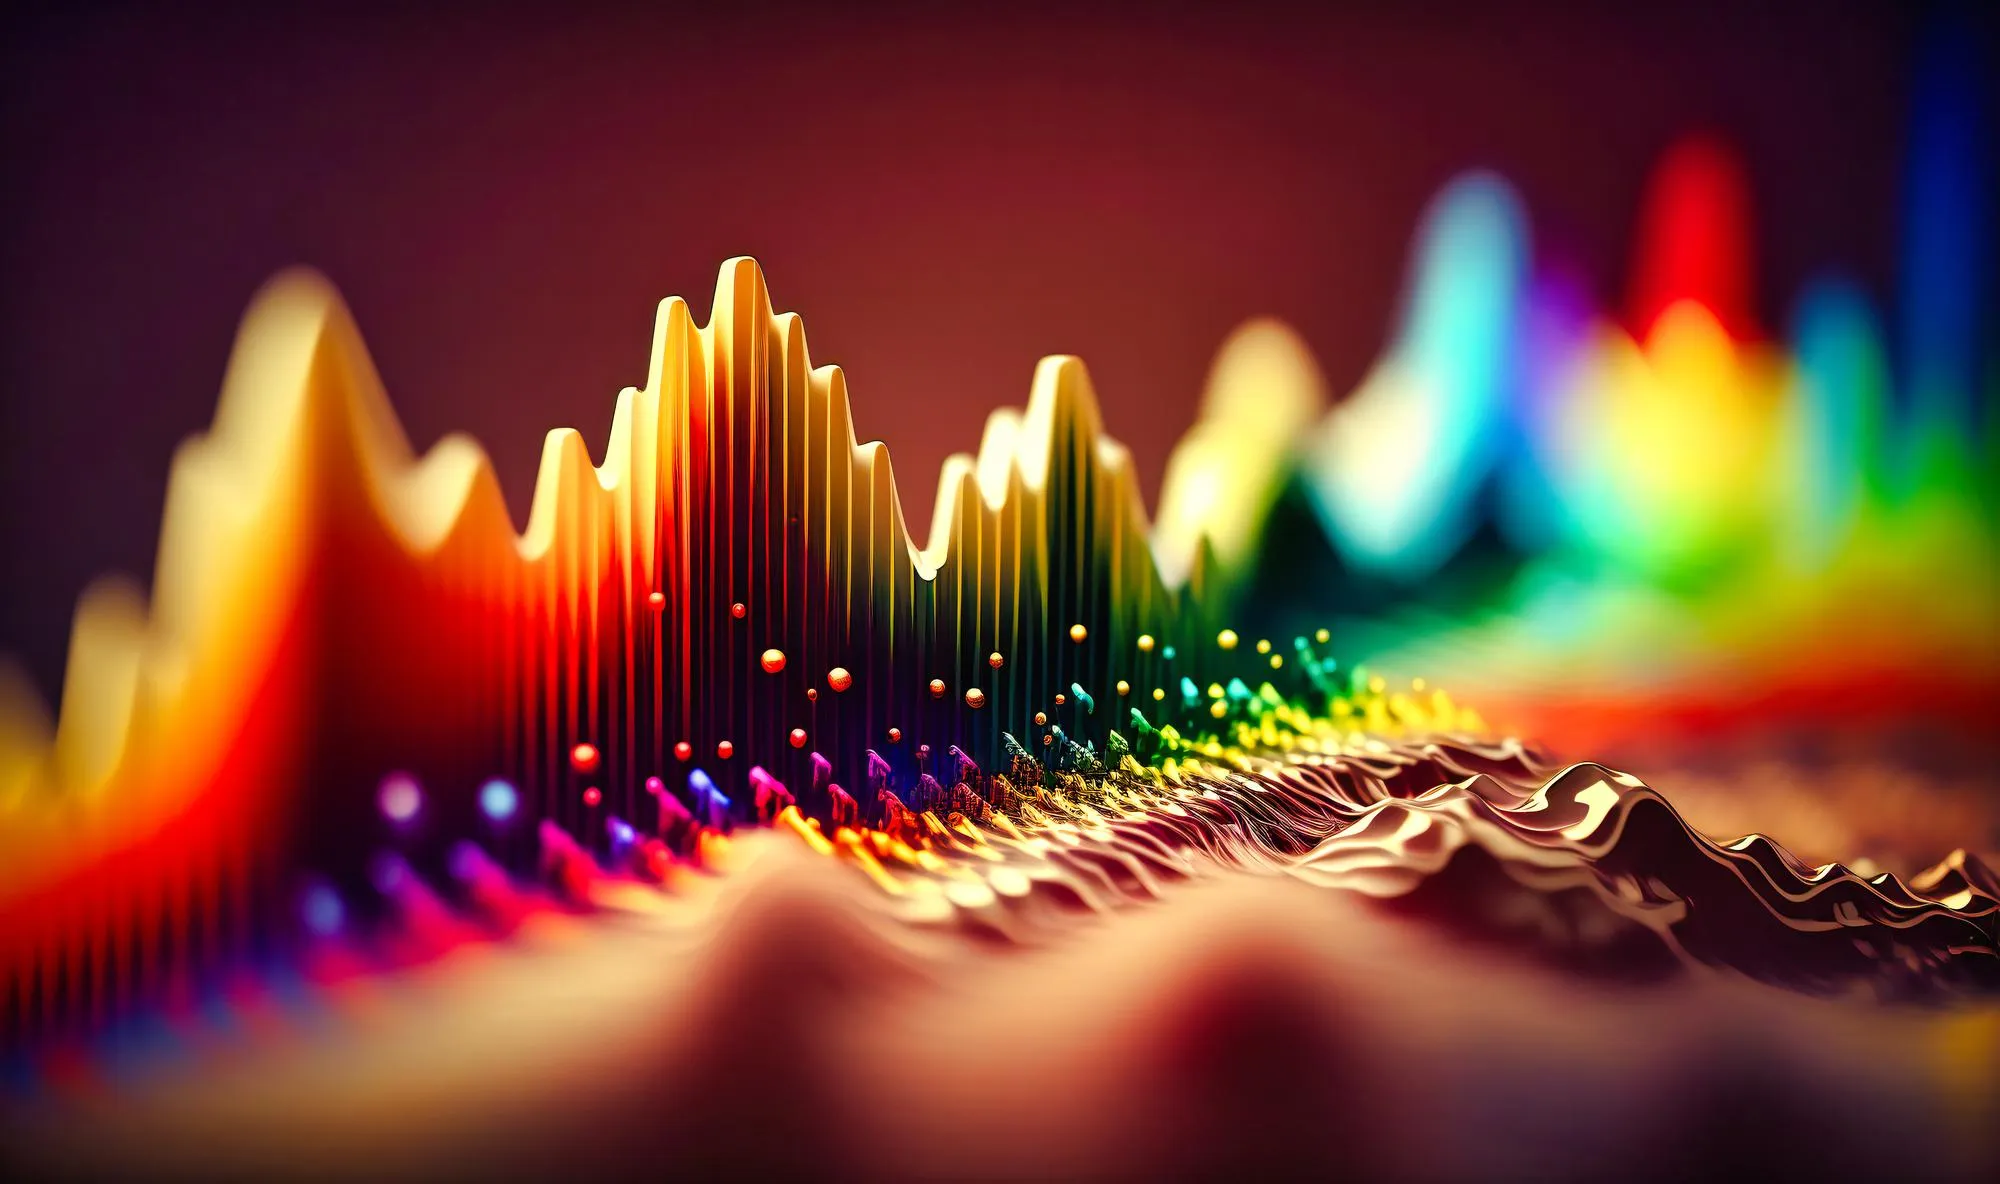 Abstract View Sound Wave With Its Peaks Troughs Shown Colorful Visualization